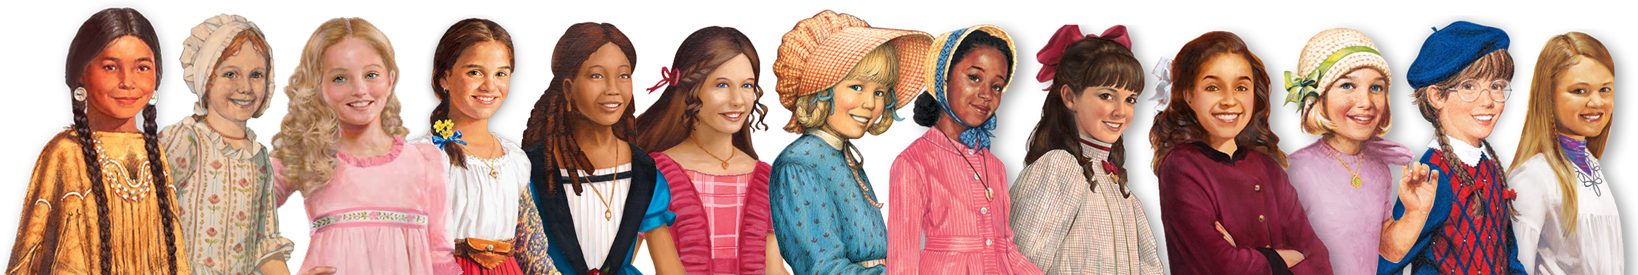 American Girl says the '90s are ancient history. American girls